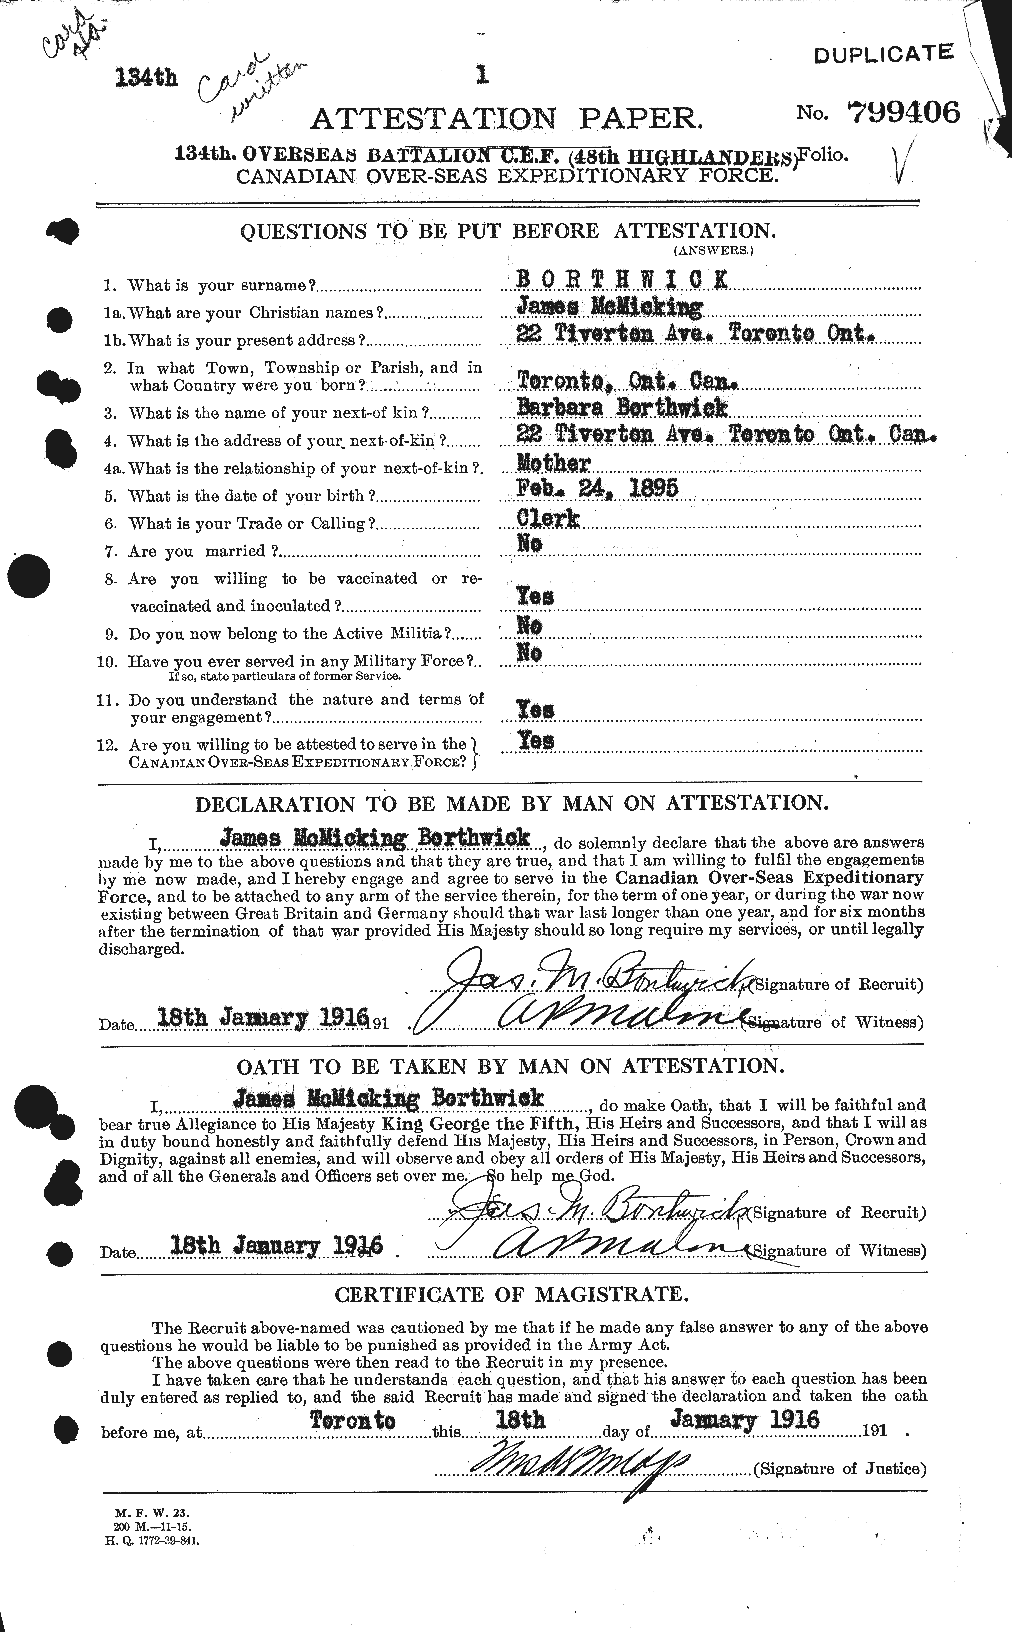 Personnel Records of the First World War - CEF 253503a